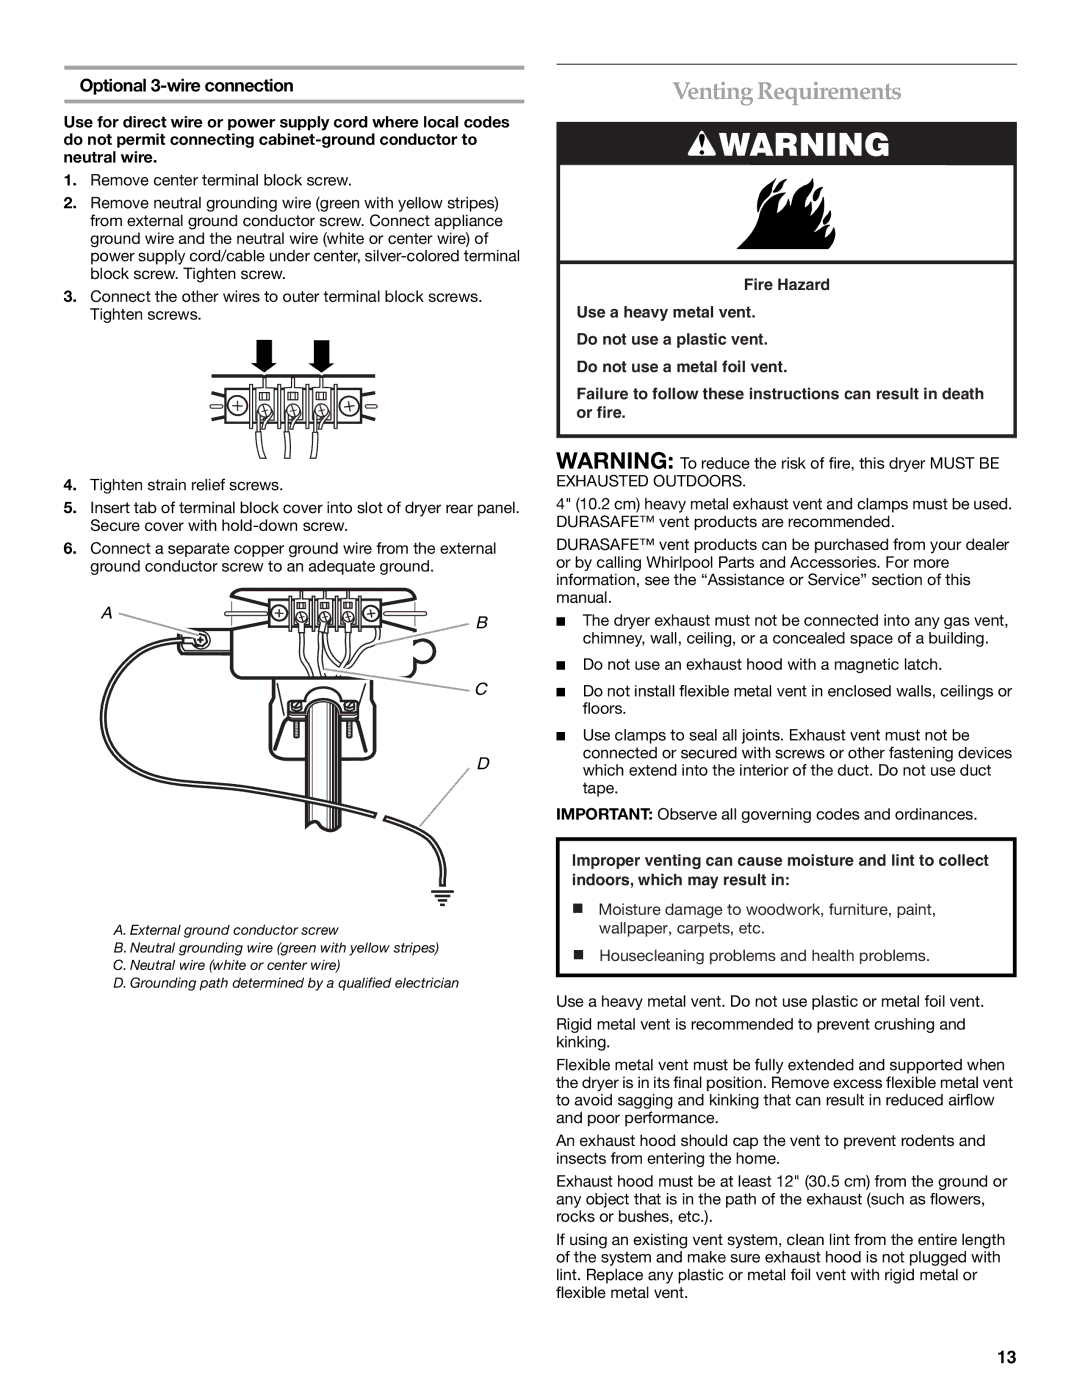 KitchenAid YKEHS01P manual VentingRequirements, Optional 3-wire connection 